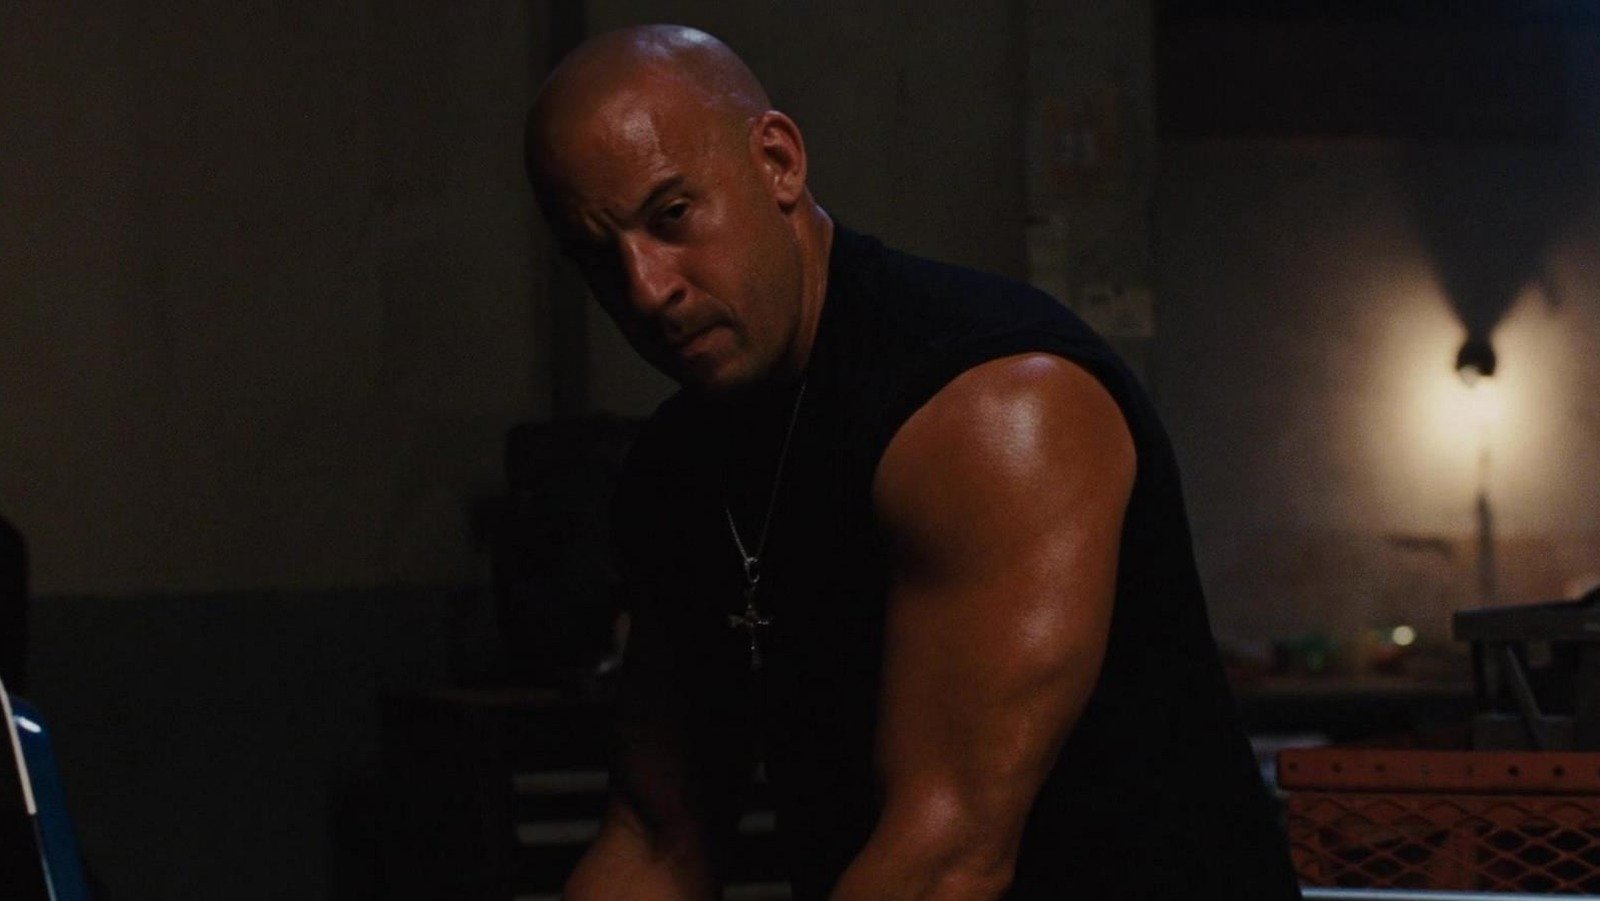 The Historical Trilogy Vin Diesel Has Wanted To Make Since 2002